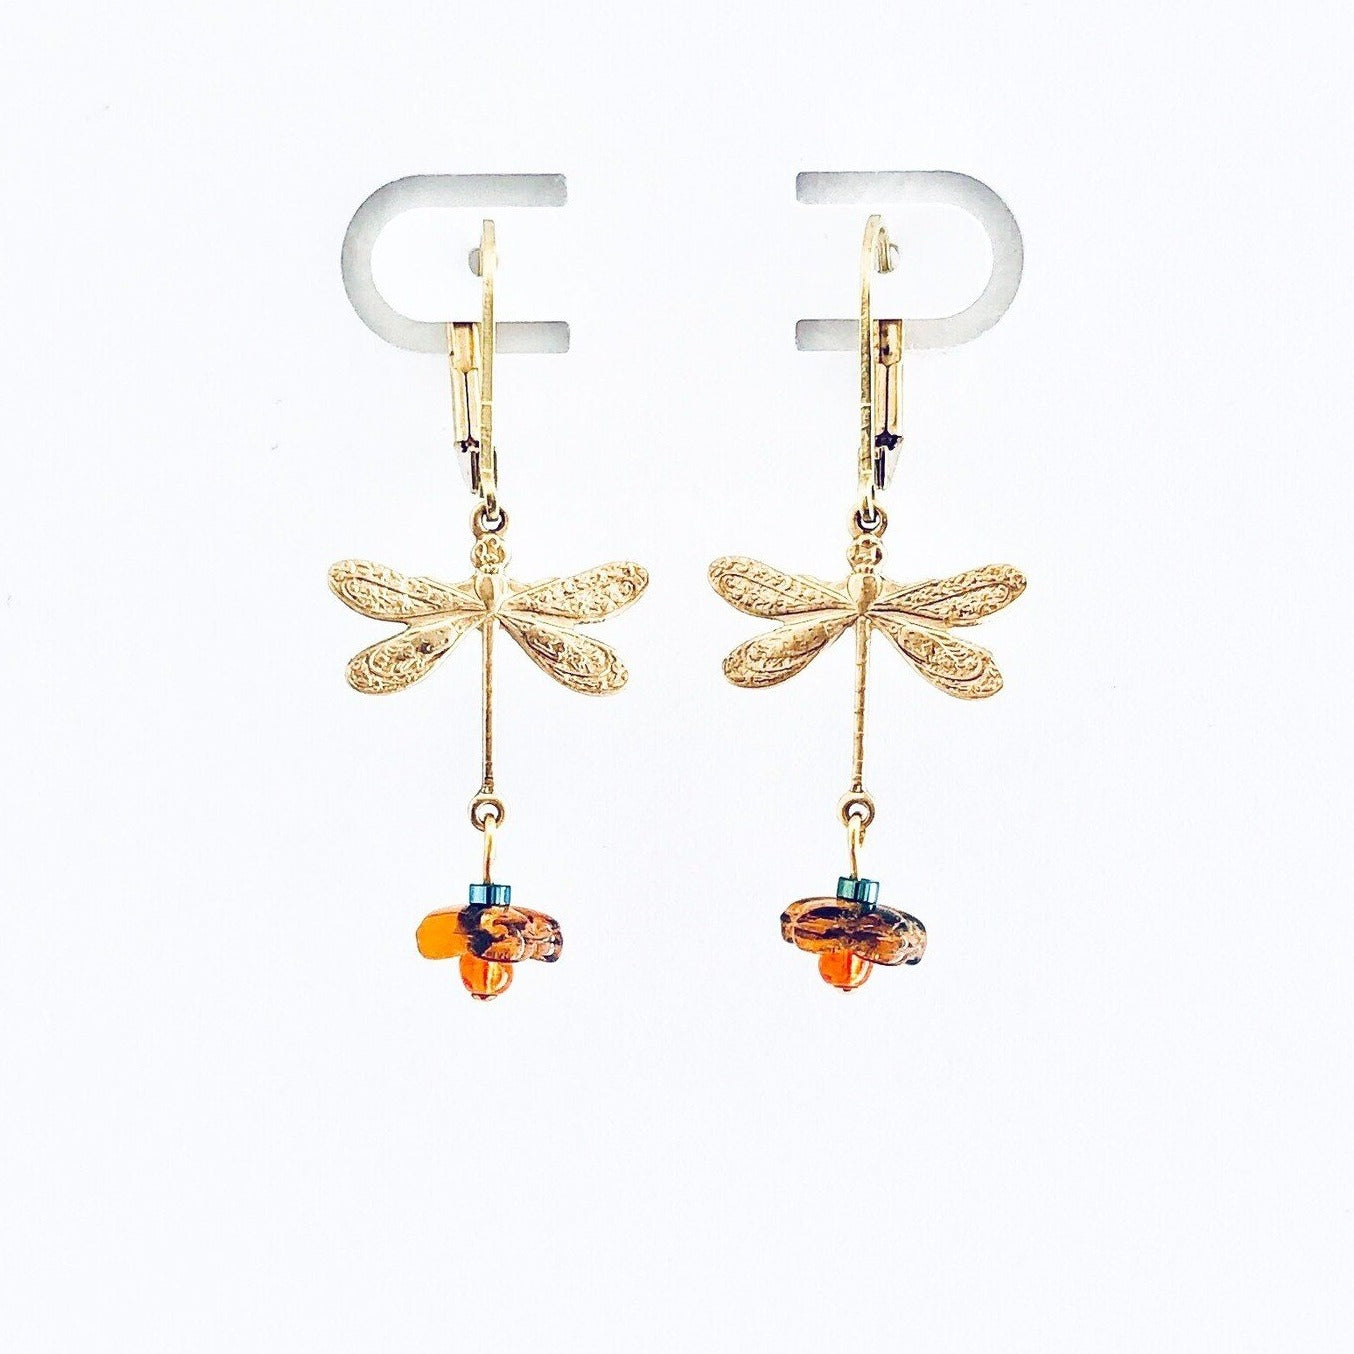 dragonfly earrings from brass and colored stones